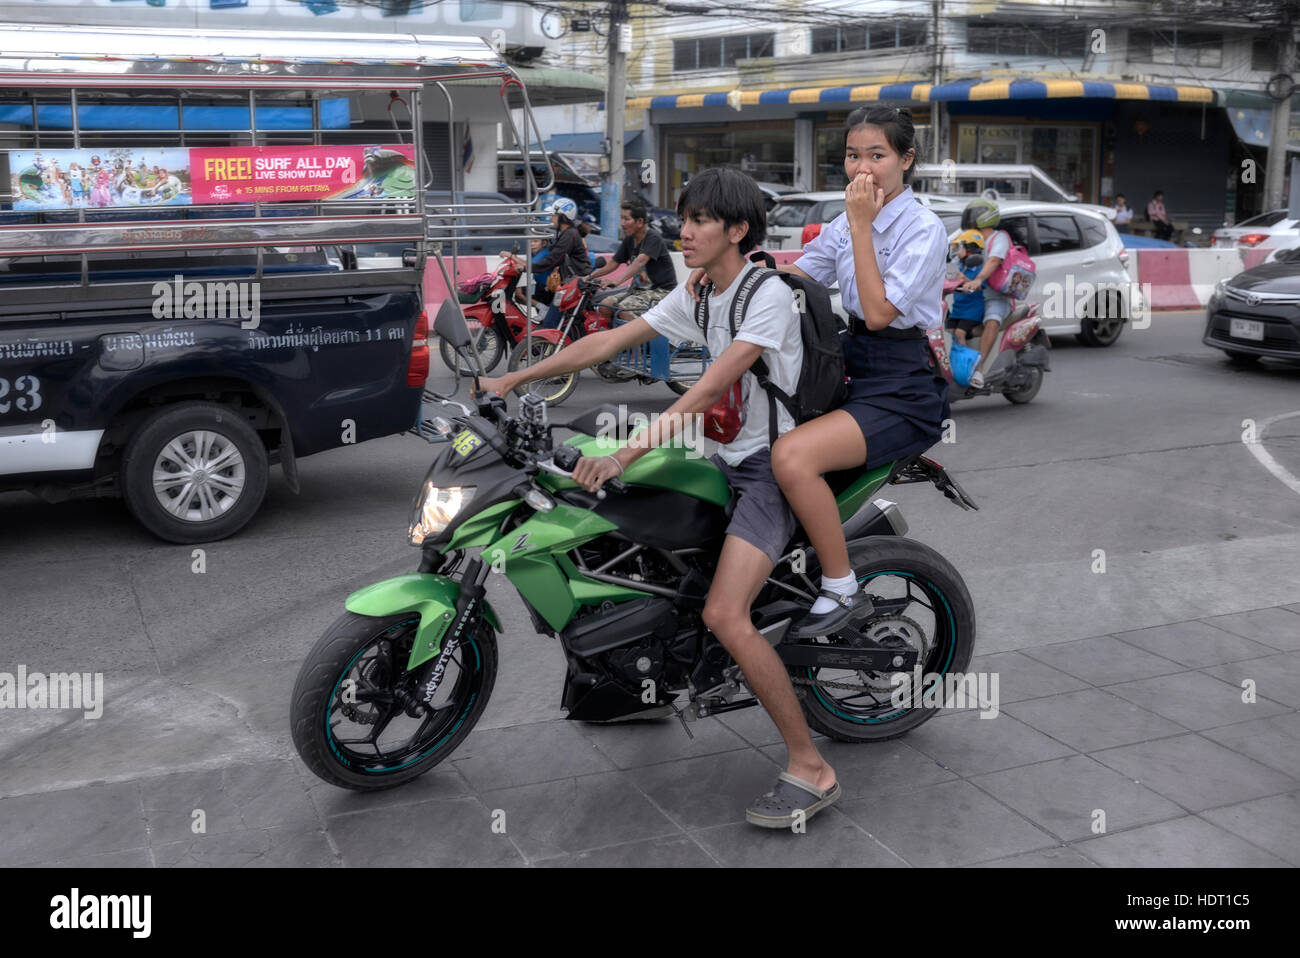 Motorbike young rider. Thailand street scene with older brother collecting younger sister from school on his motorbike. Neither wearing safety helmet. Stock Photo